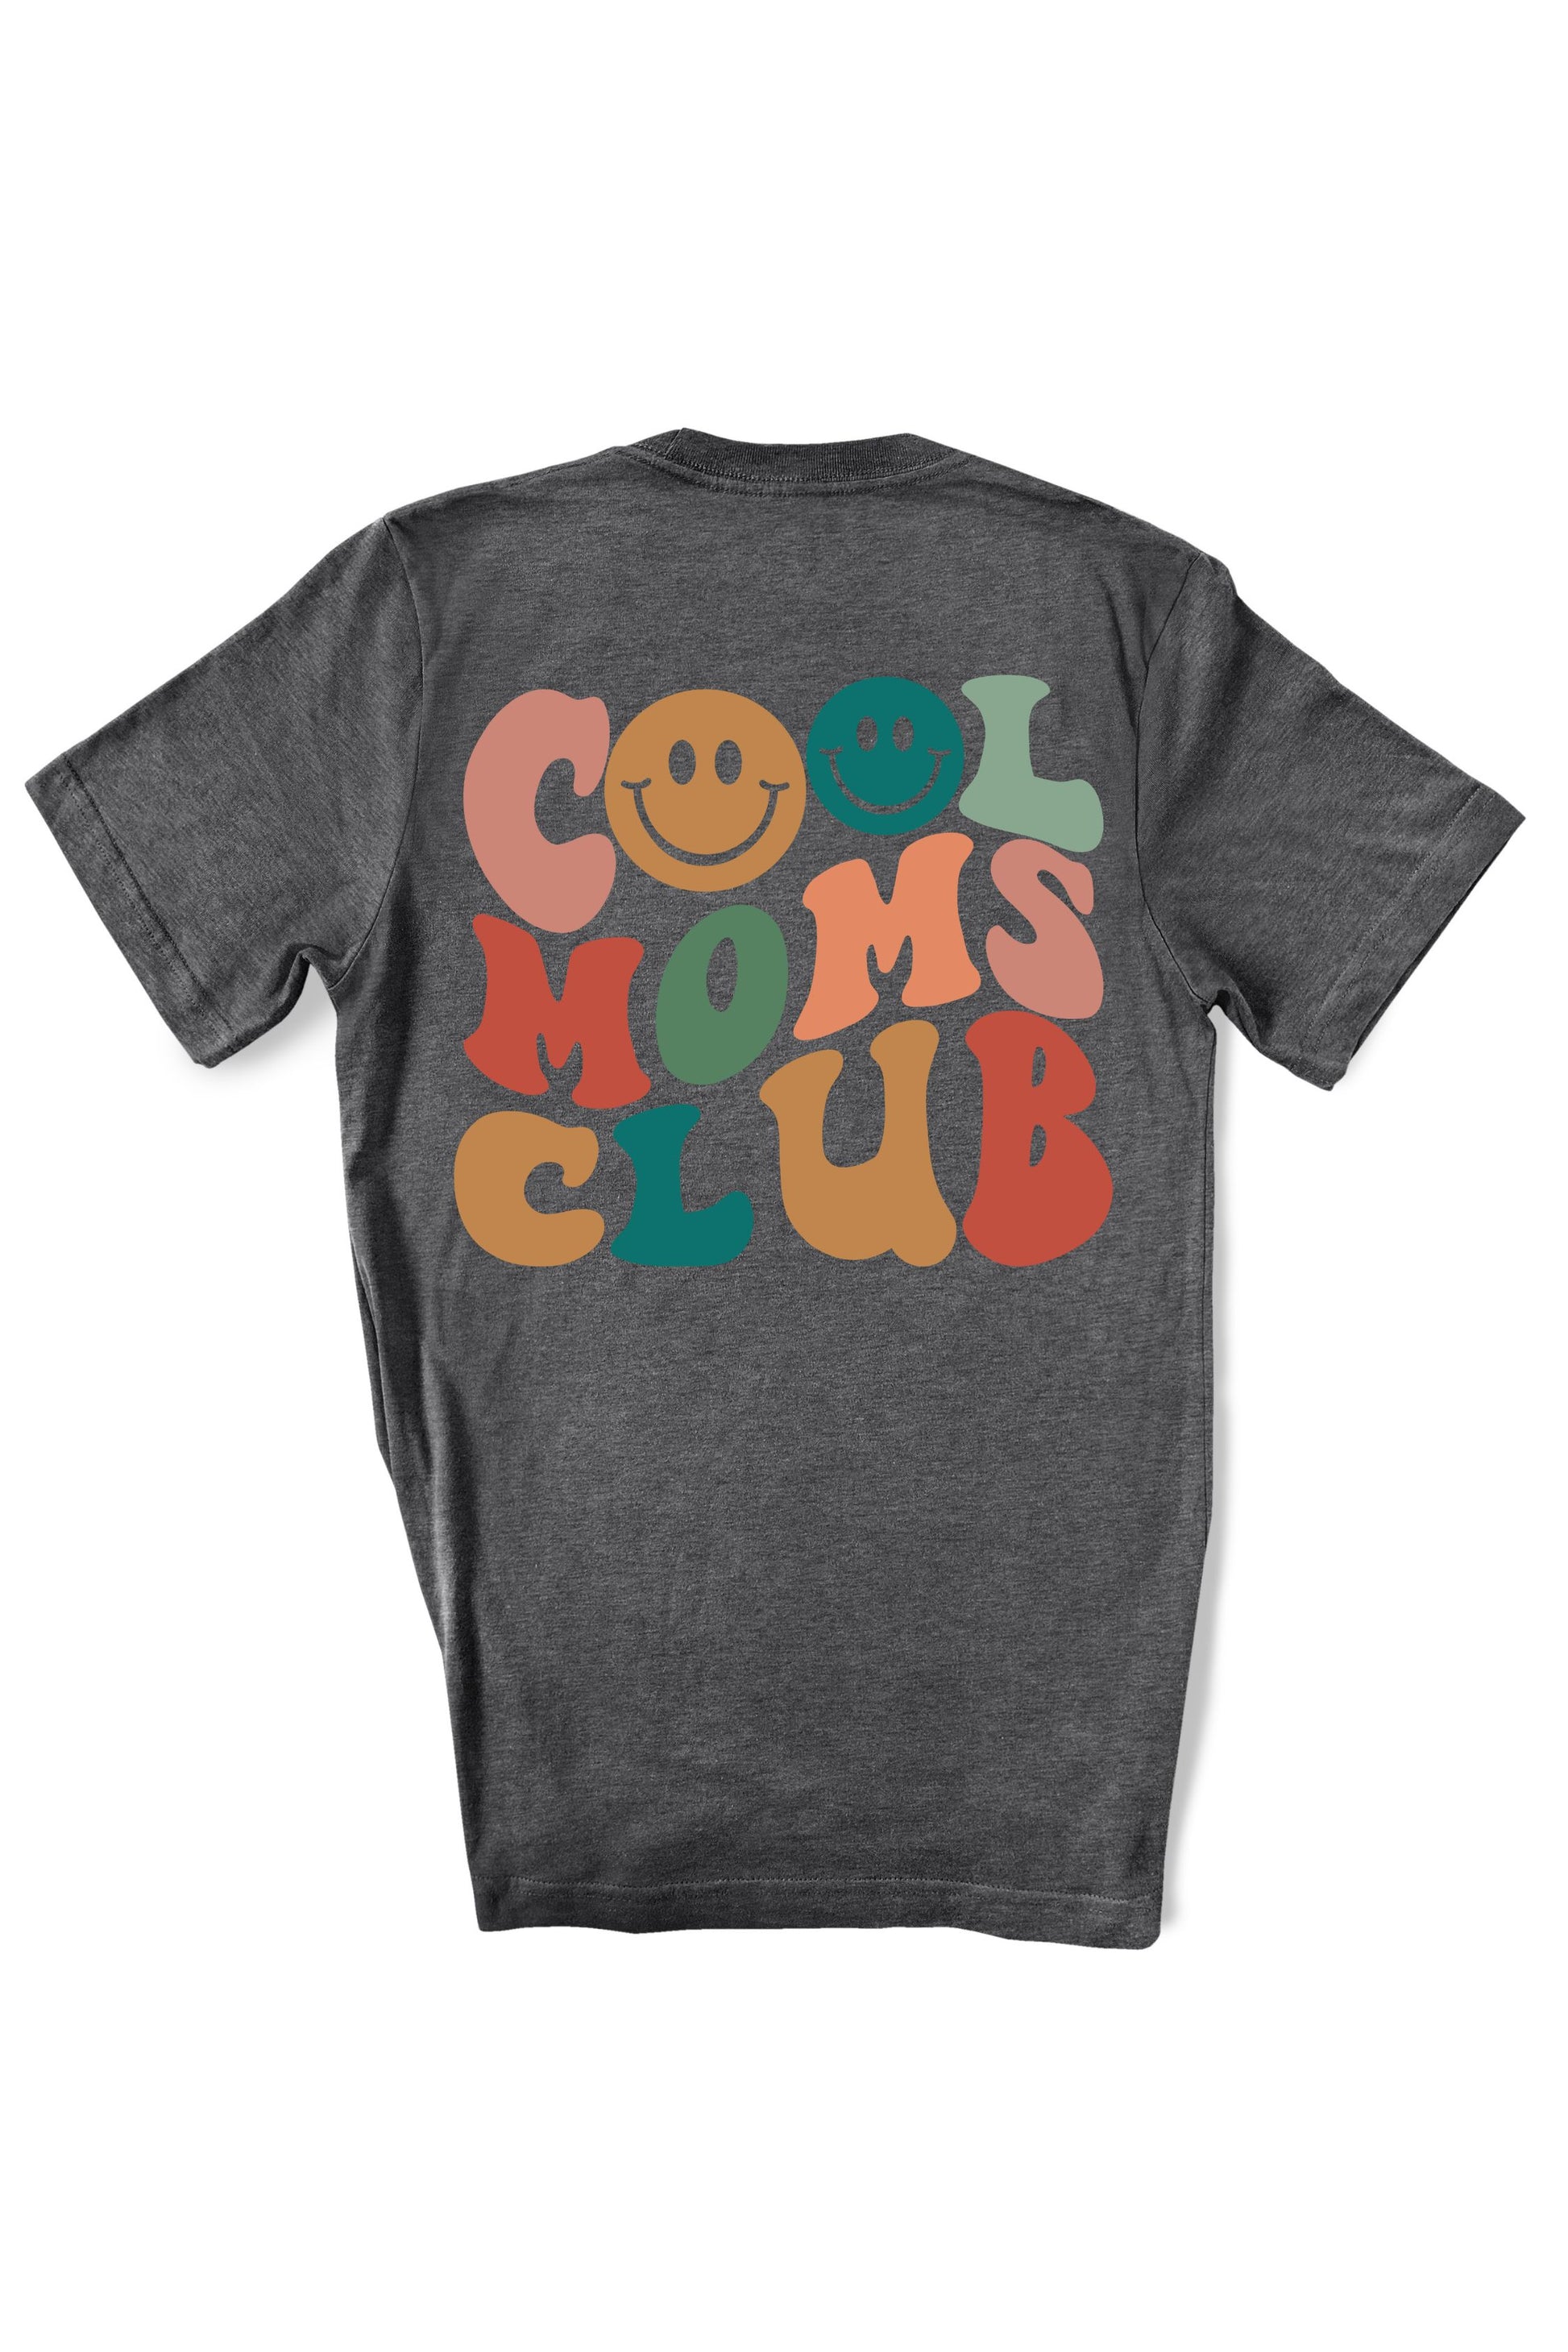 Cool Moms Club | Tee | Adult-Sister Shirts-Sister Shirts, Cute & Custom Tees for Mama & Littles in Trussville, Alabama.